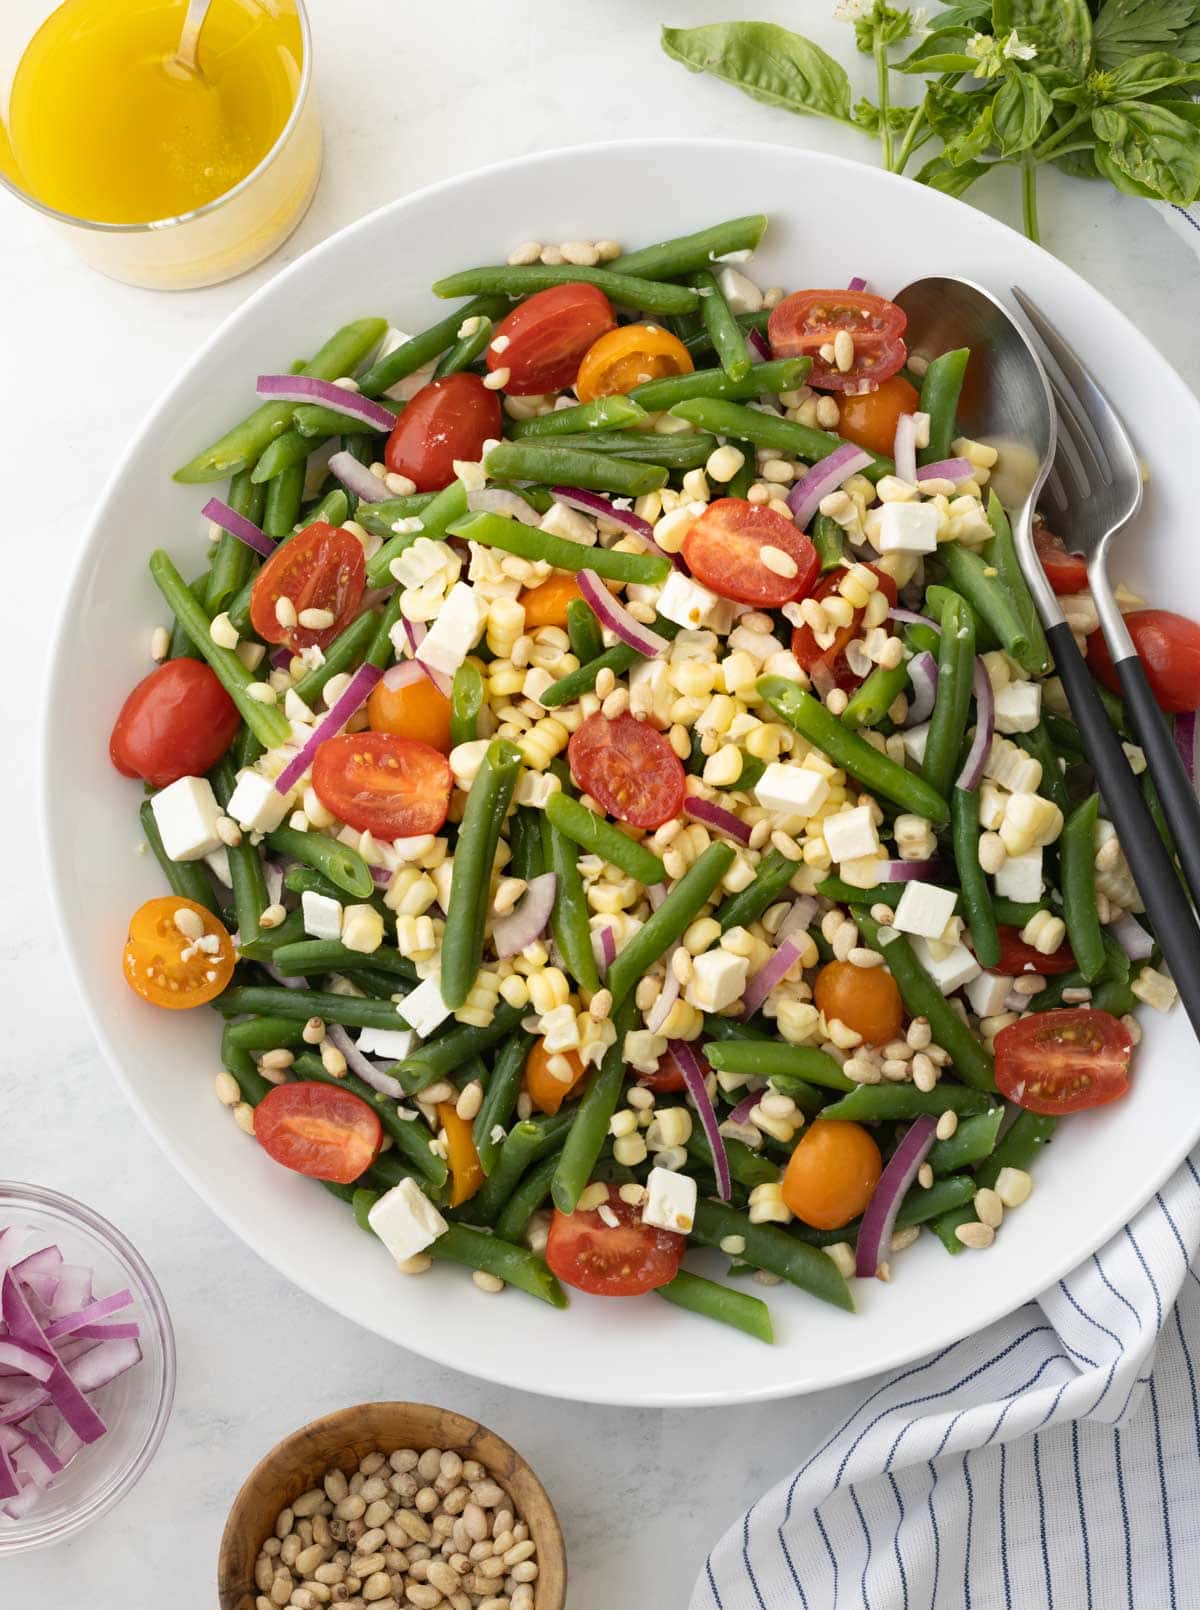 Summery cold green bean salad with cherry tomatoes, corn kernel, and feta cheese with vinaigrette.
